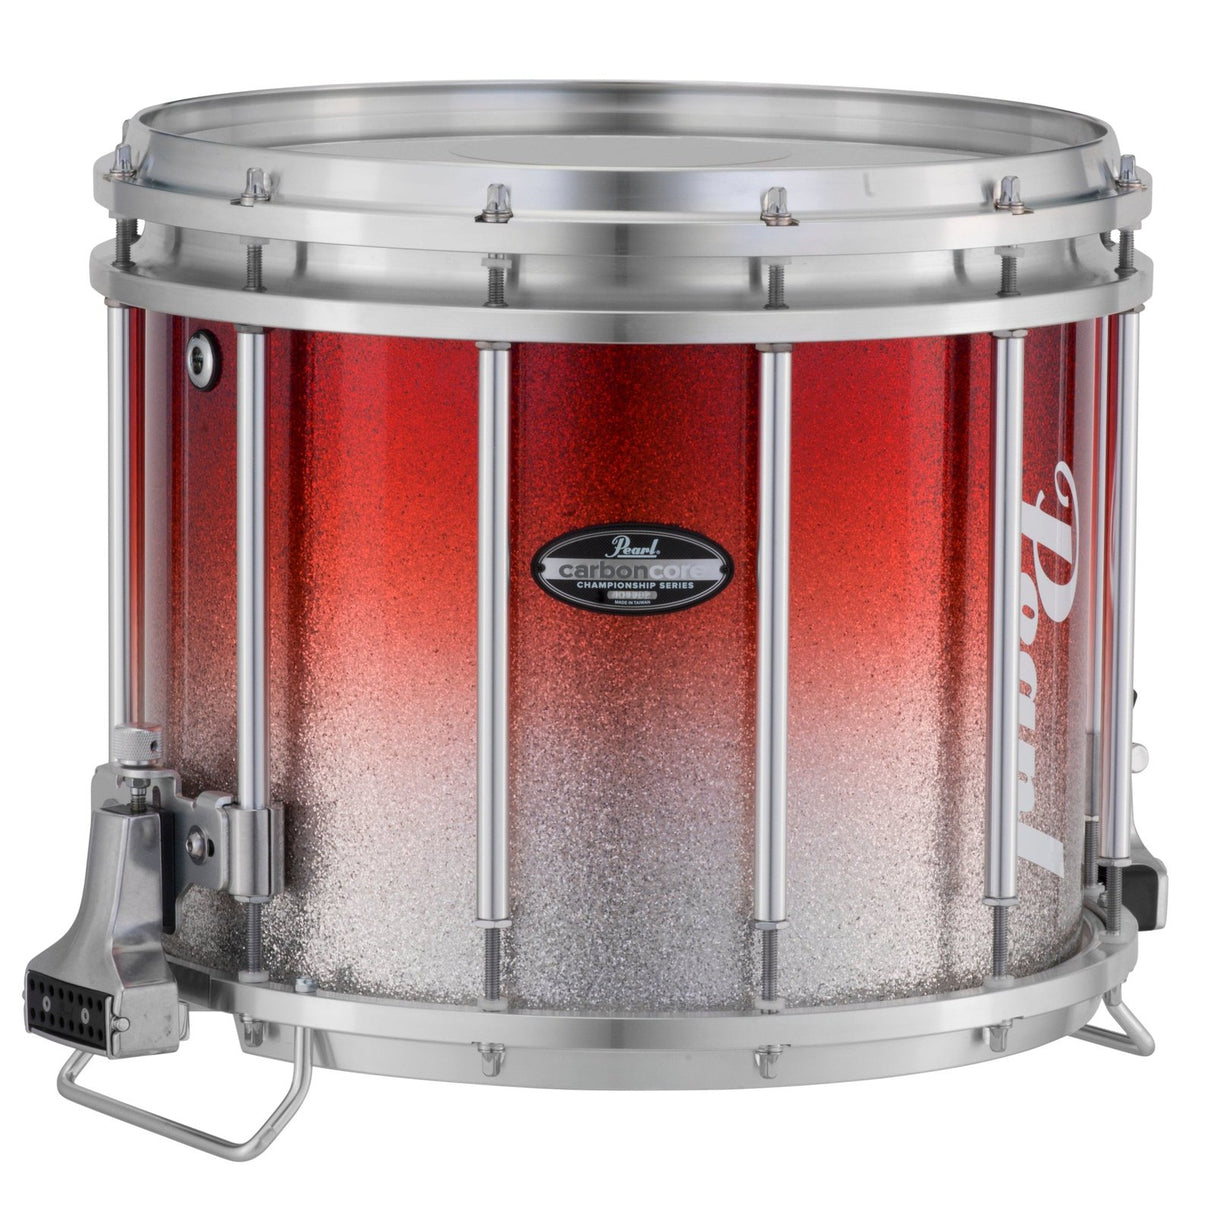 Pearl Marching Percussion: 13X11 Maple Carboncore Ffx Marching Snare Drum, W/R Ring #968 - Red Silver Fade (Top)